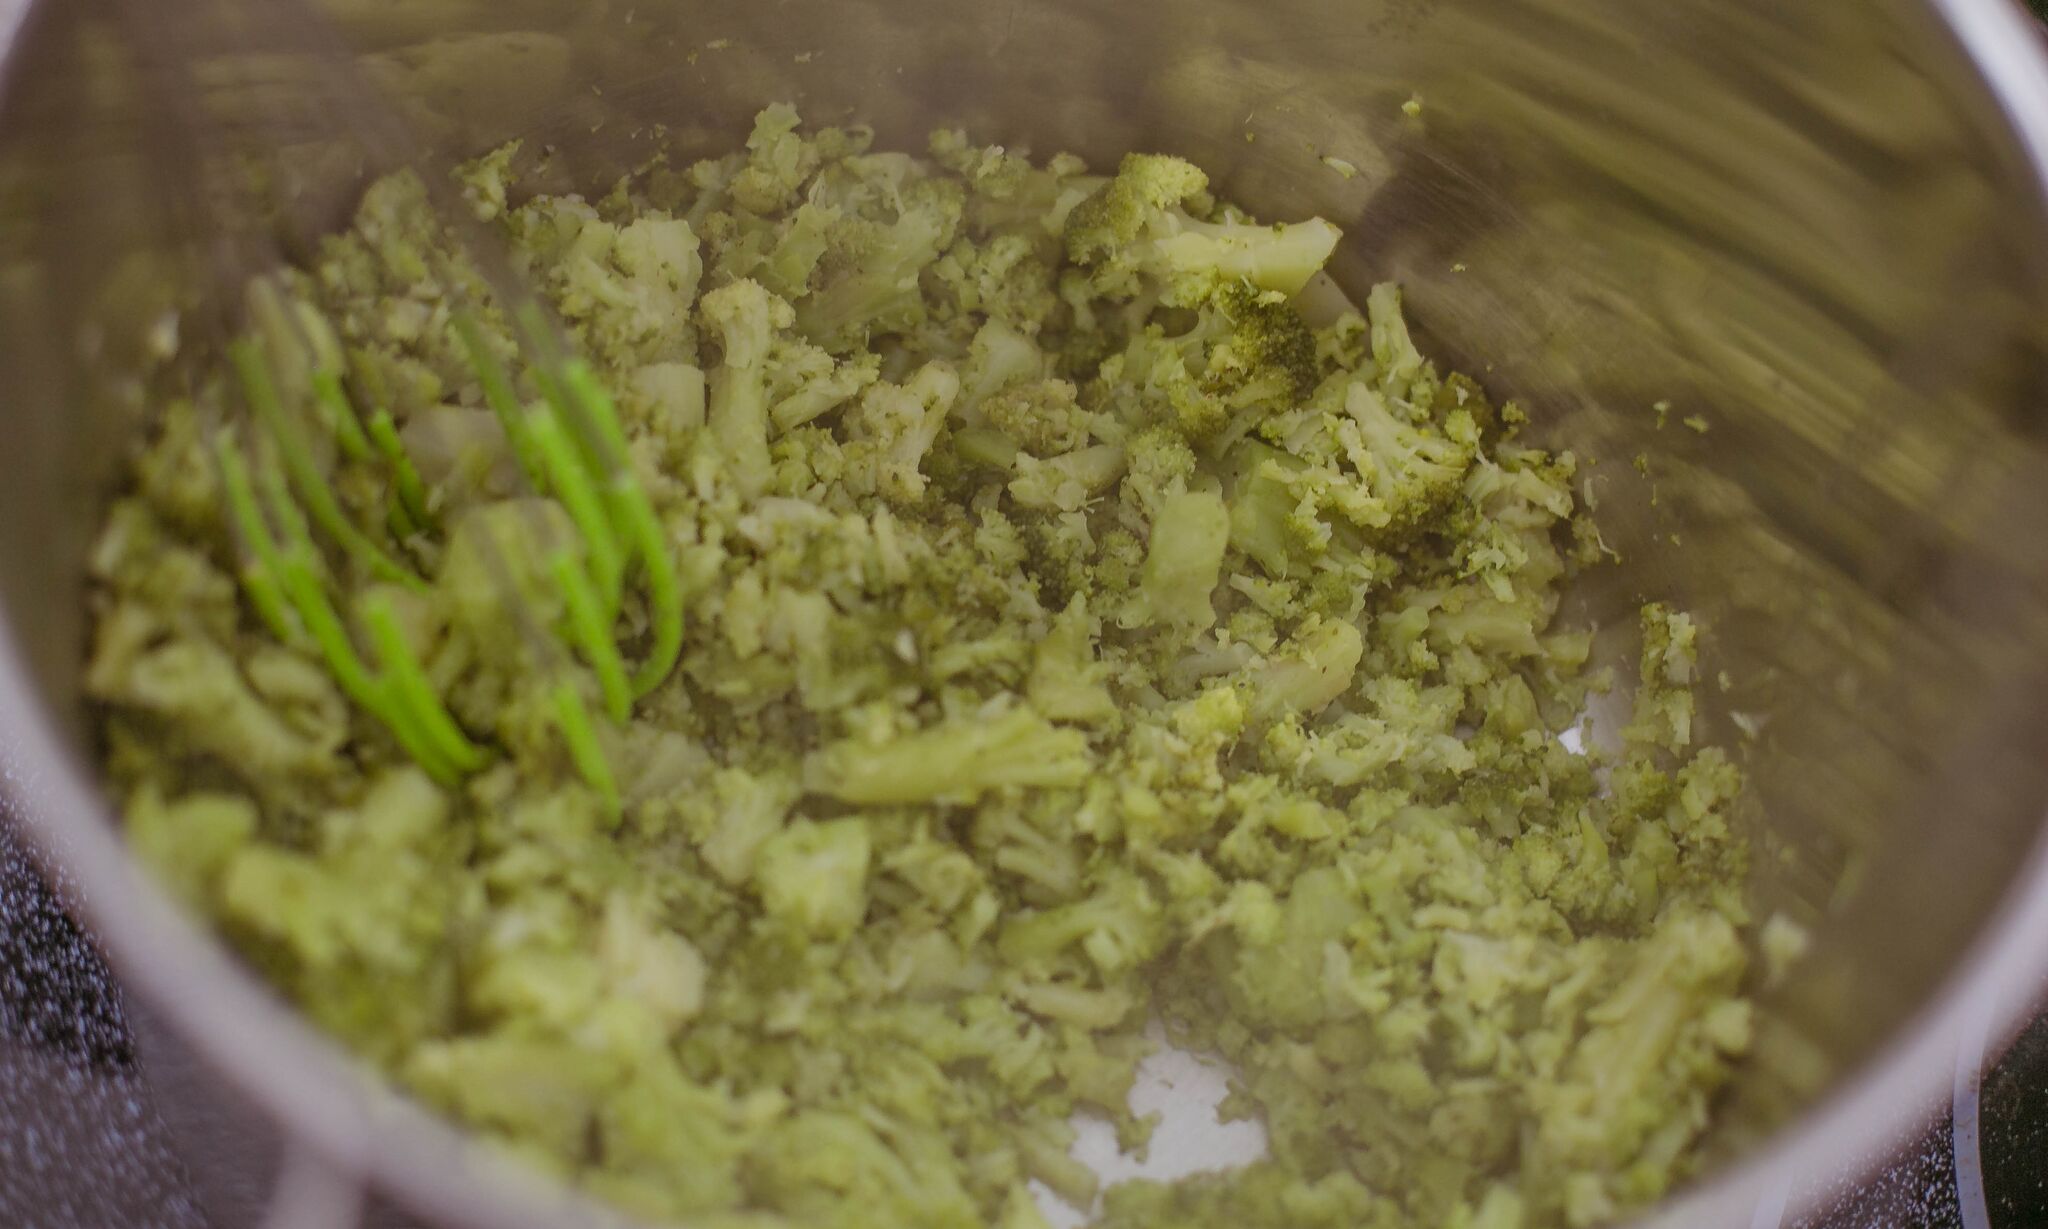 Steam broccoli first, then mash with a potato masher when cooled. 